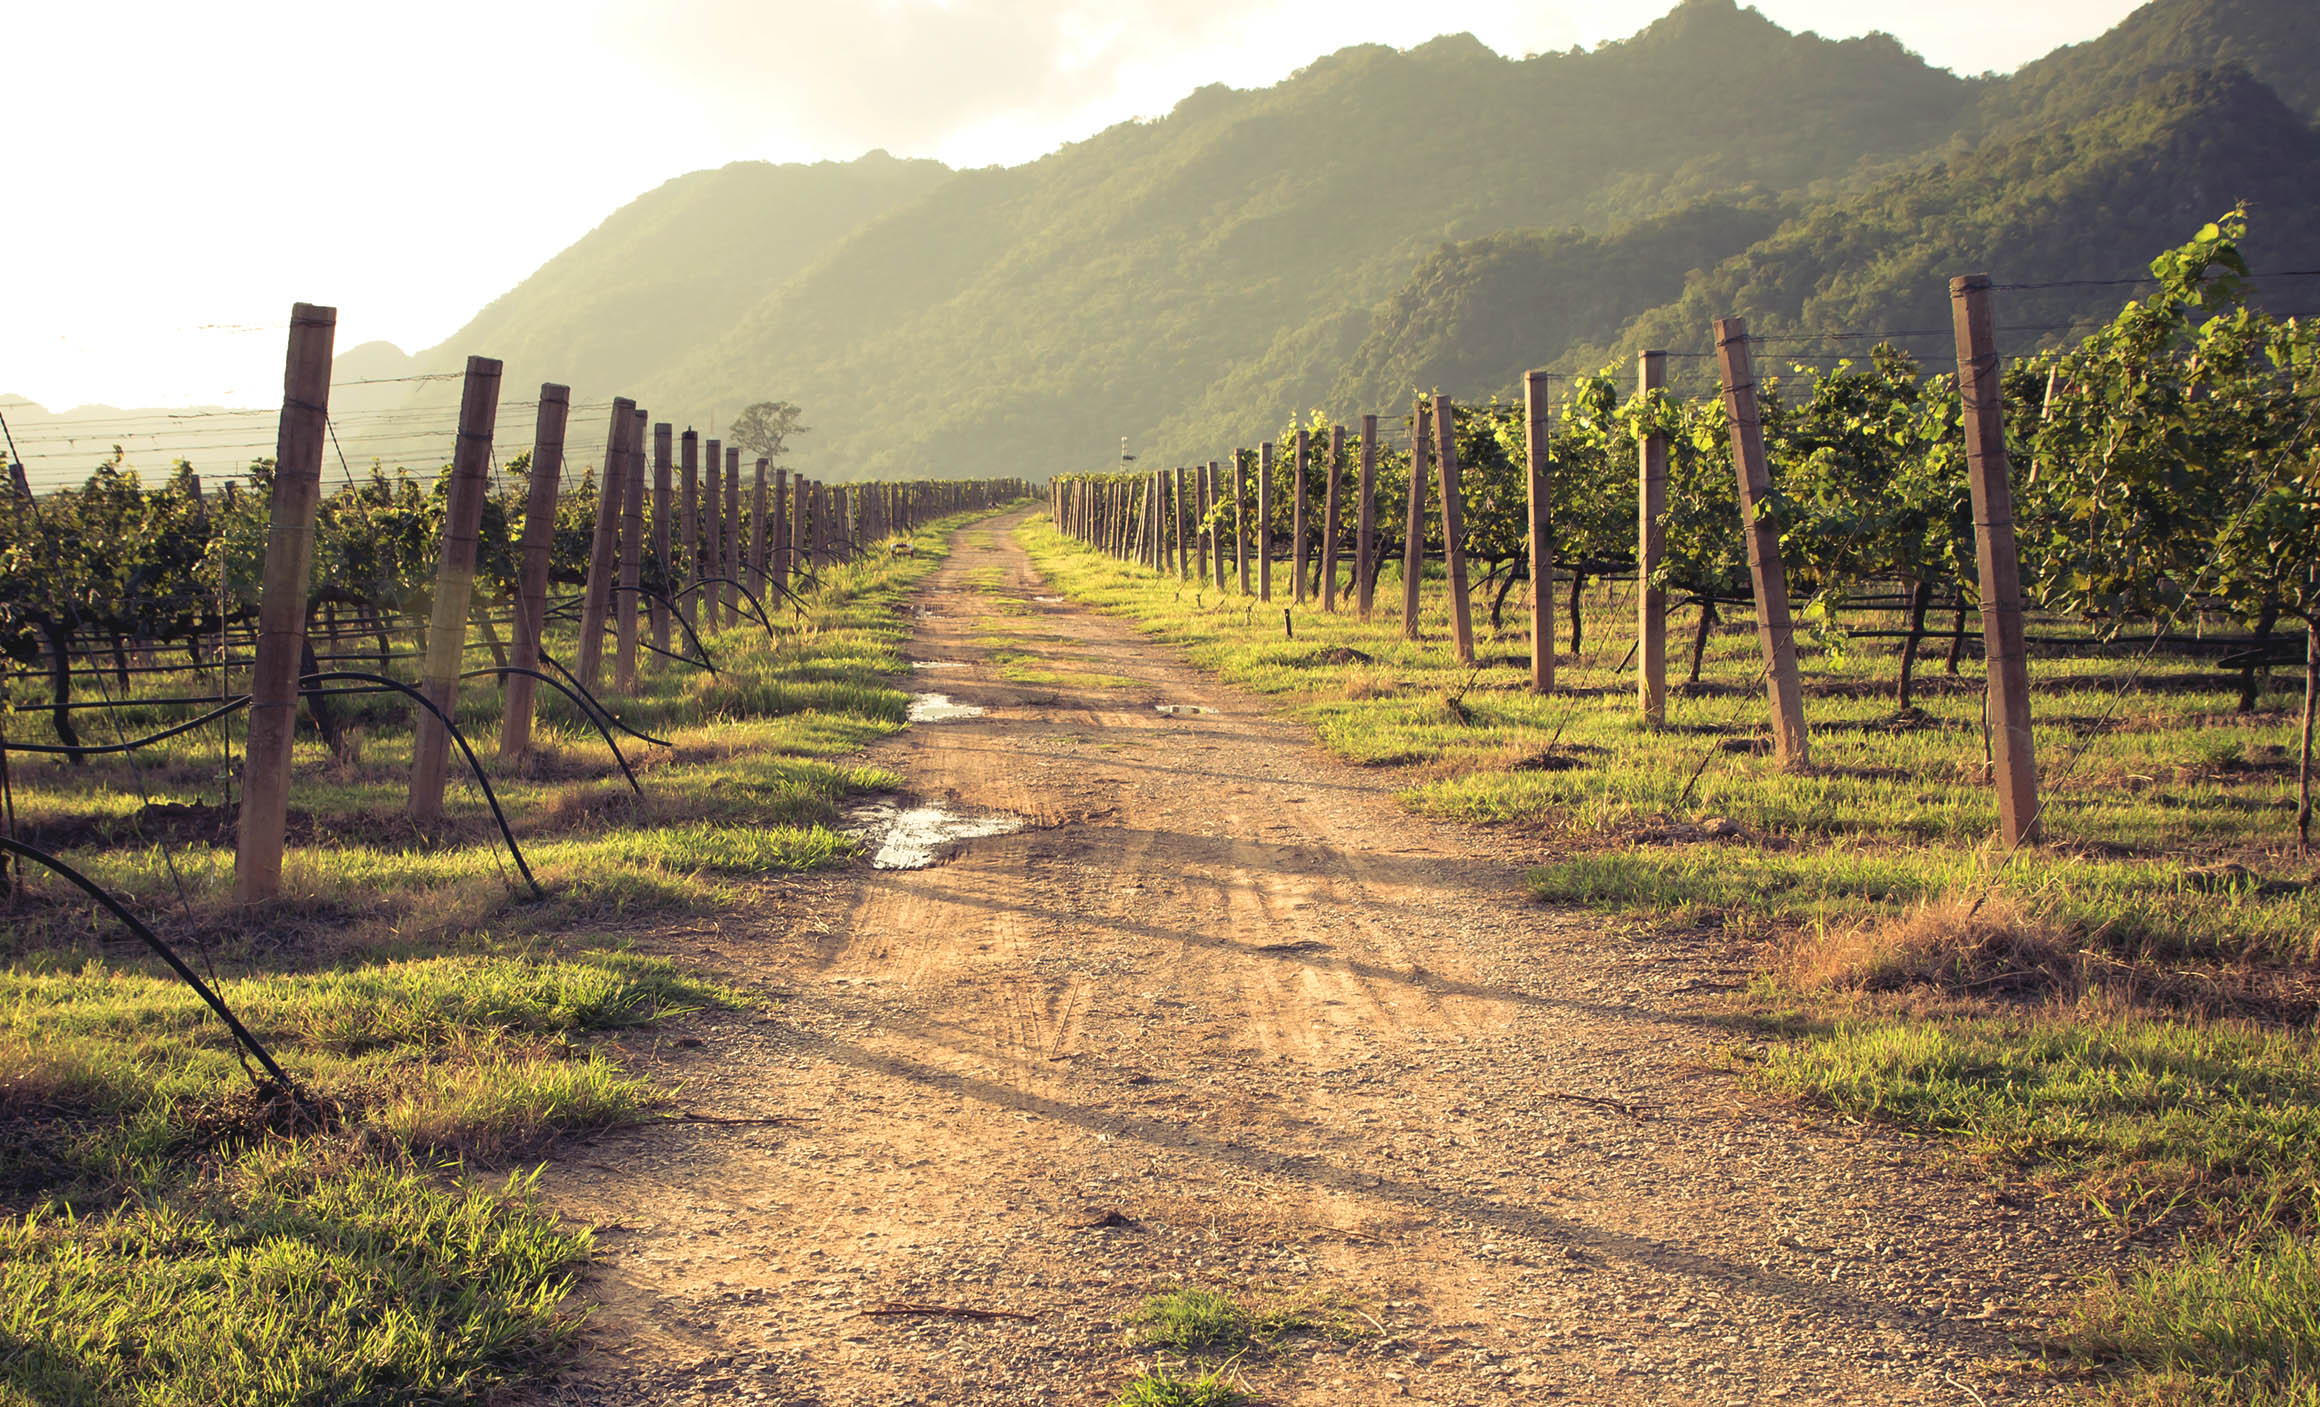 A stroll through a vineyard offers a different perspective on Thailand.